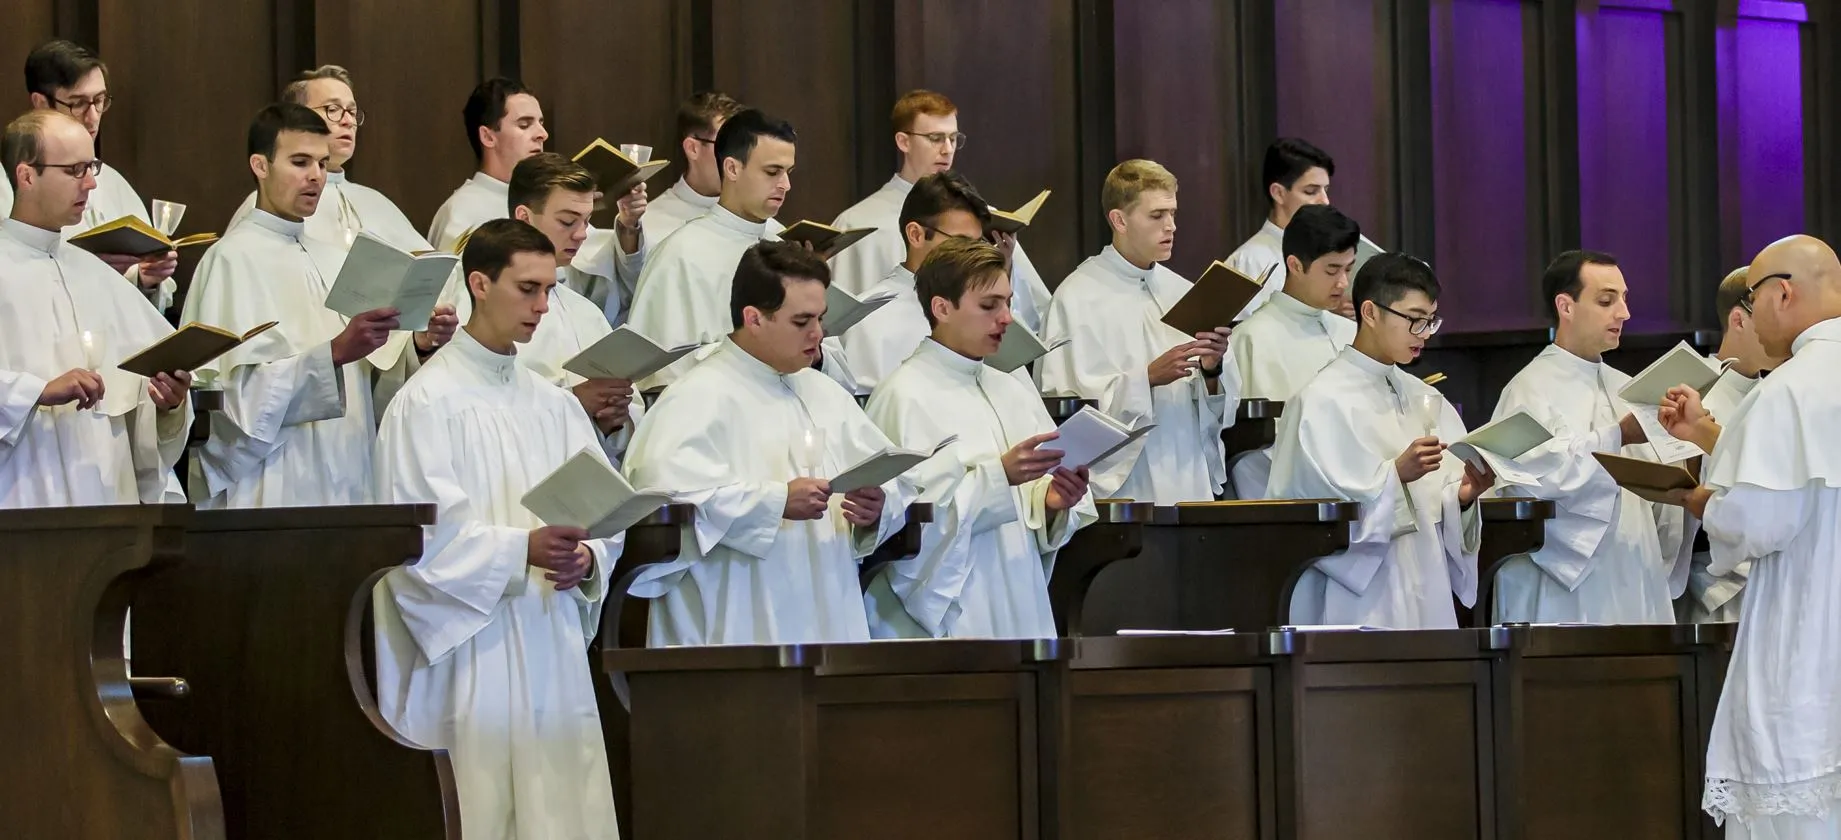 The choir sings during Candelmas at the Norbertine Fathers of St. Michael’s Abbey in Orange, Calif.?w=200&h=150